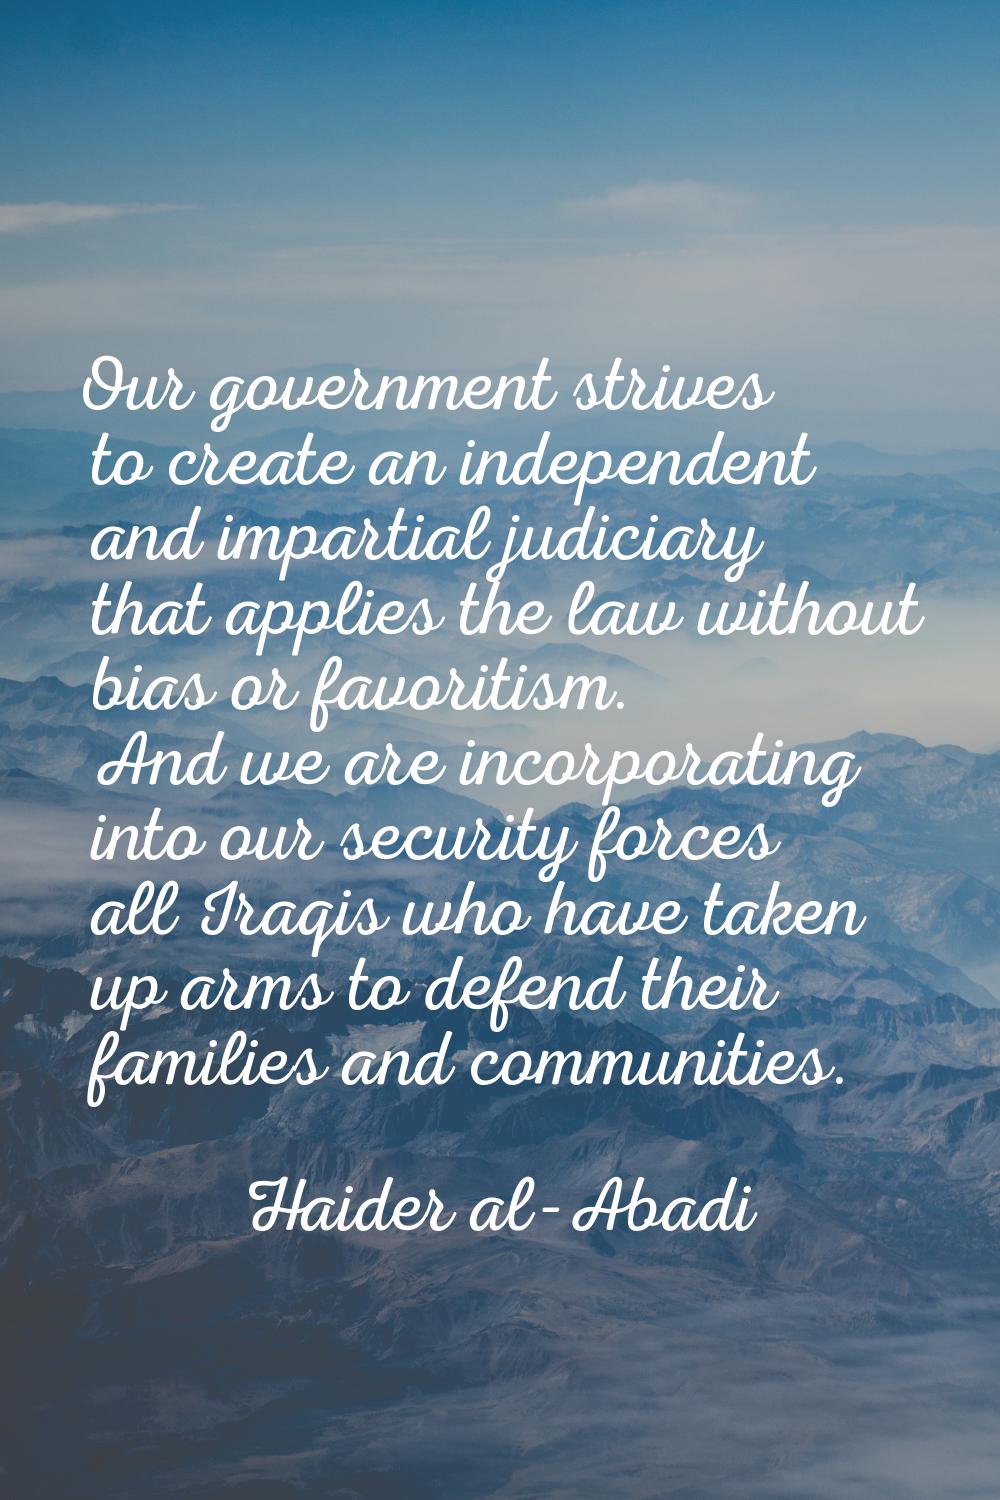 Our government strives to create an independent and impartial judiciary that applies the law withou